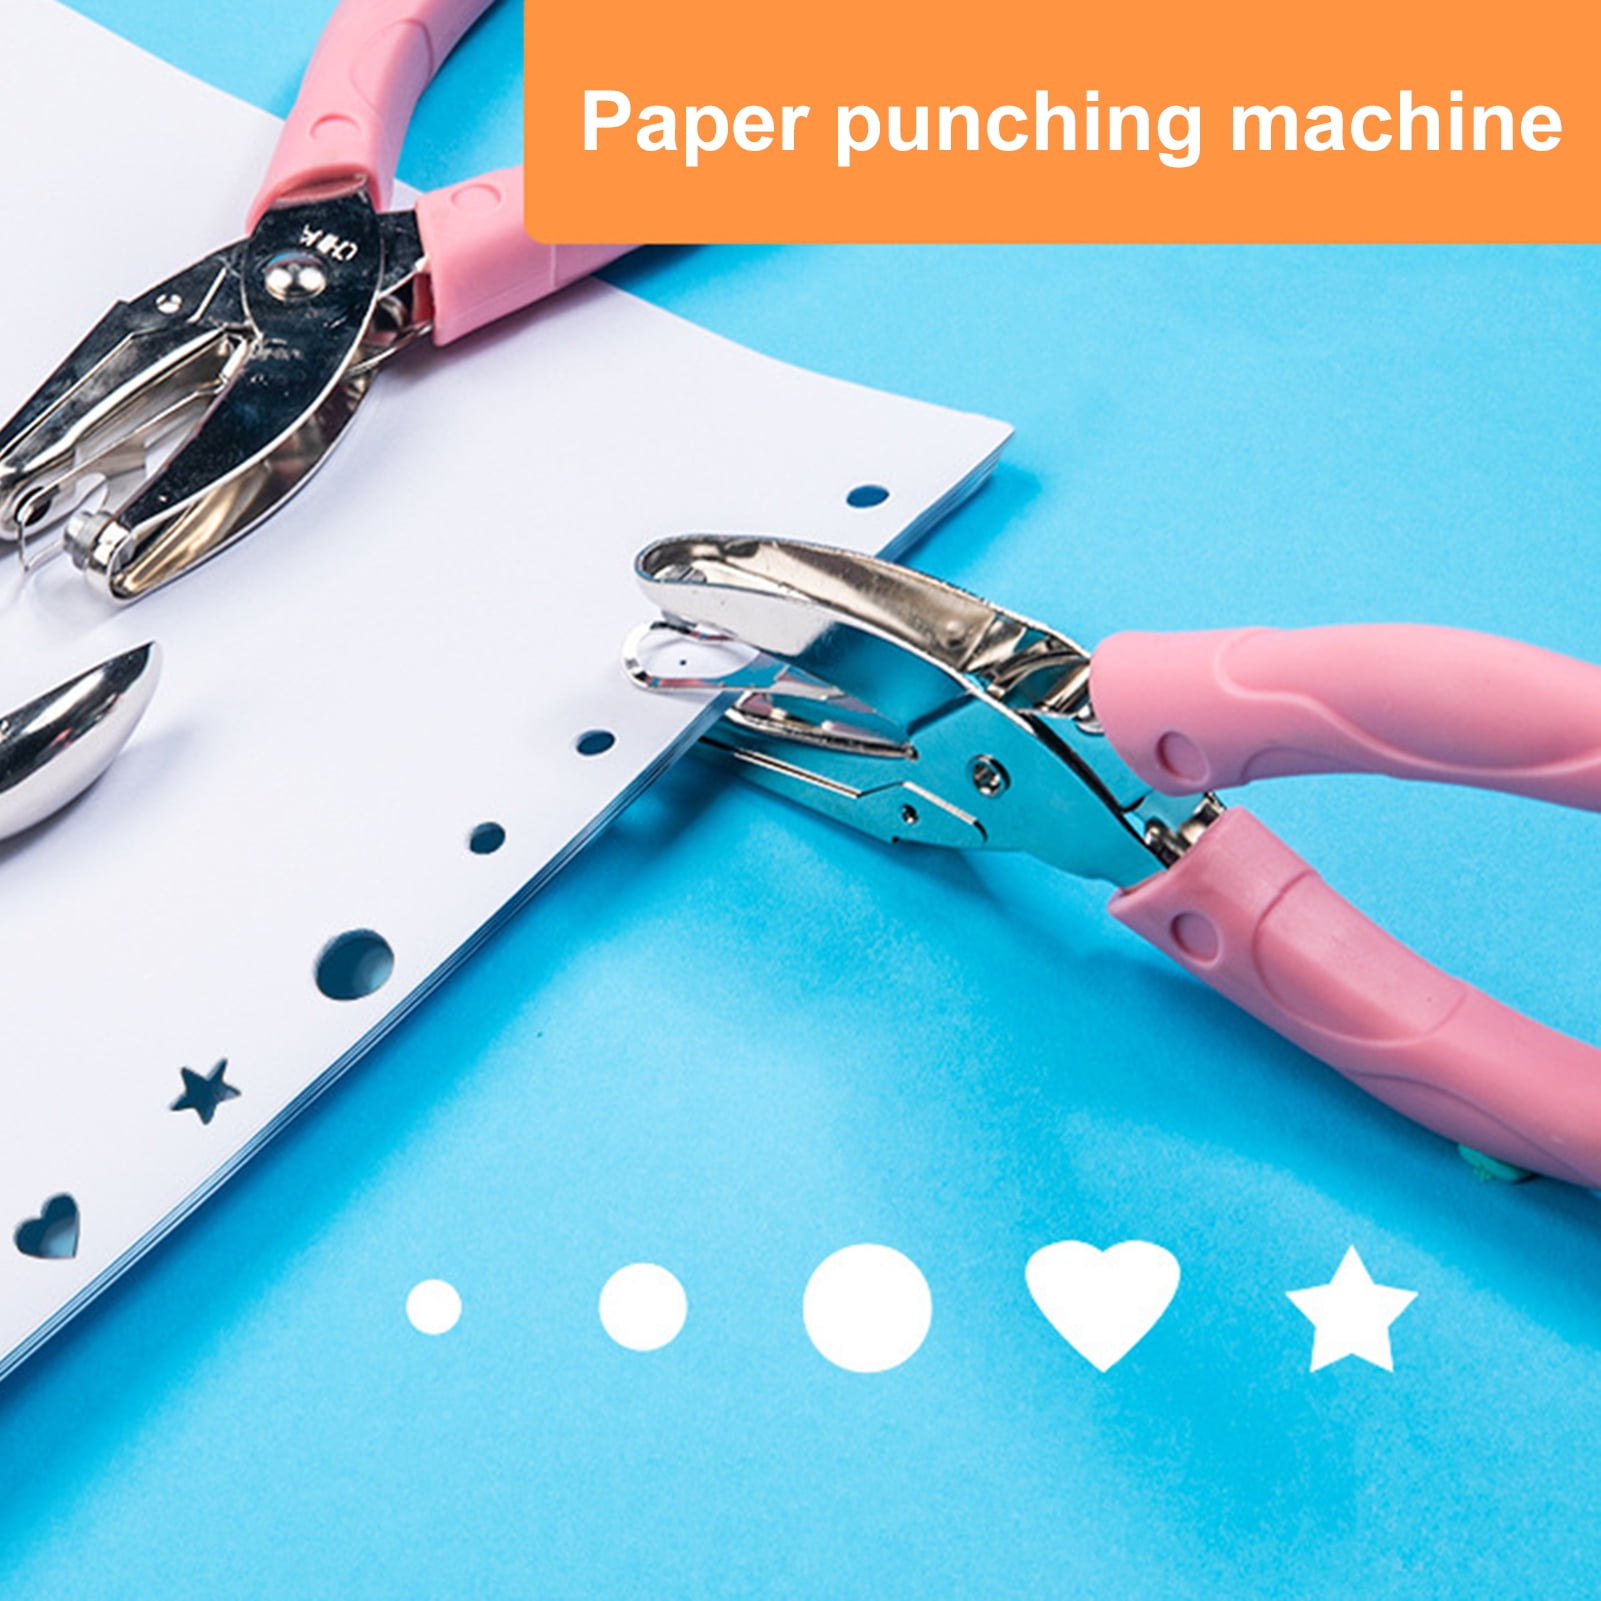 Handheld Hole Punch Hole Puncher Lightweight Punching Tool, Paper Punch Single Circle Tool for Craft Paper Labels Greeting Cards Documents 6mm, Size